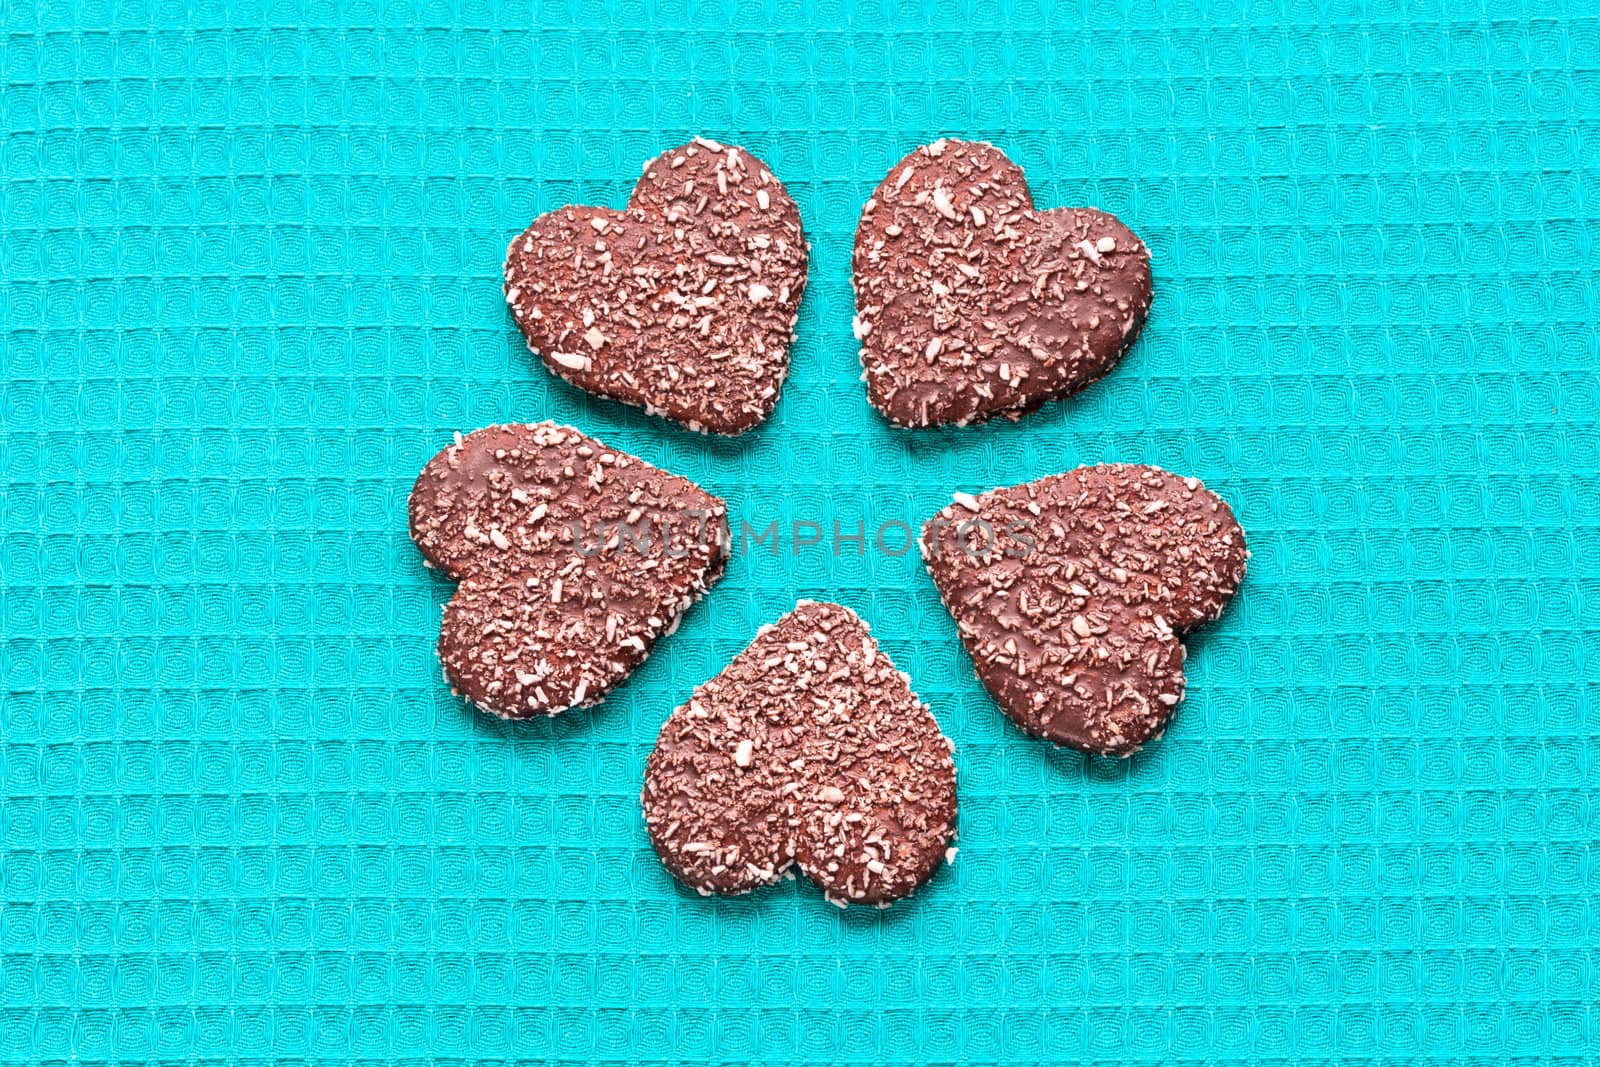 Chocolate Coconut cookies in the form of hearts